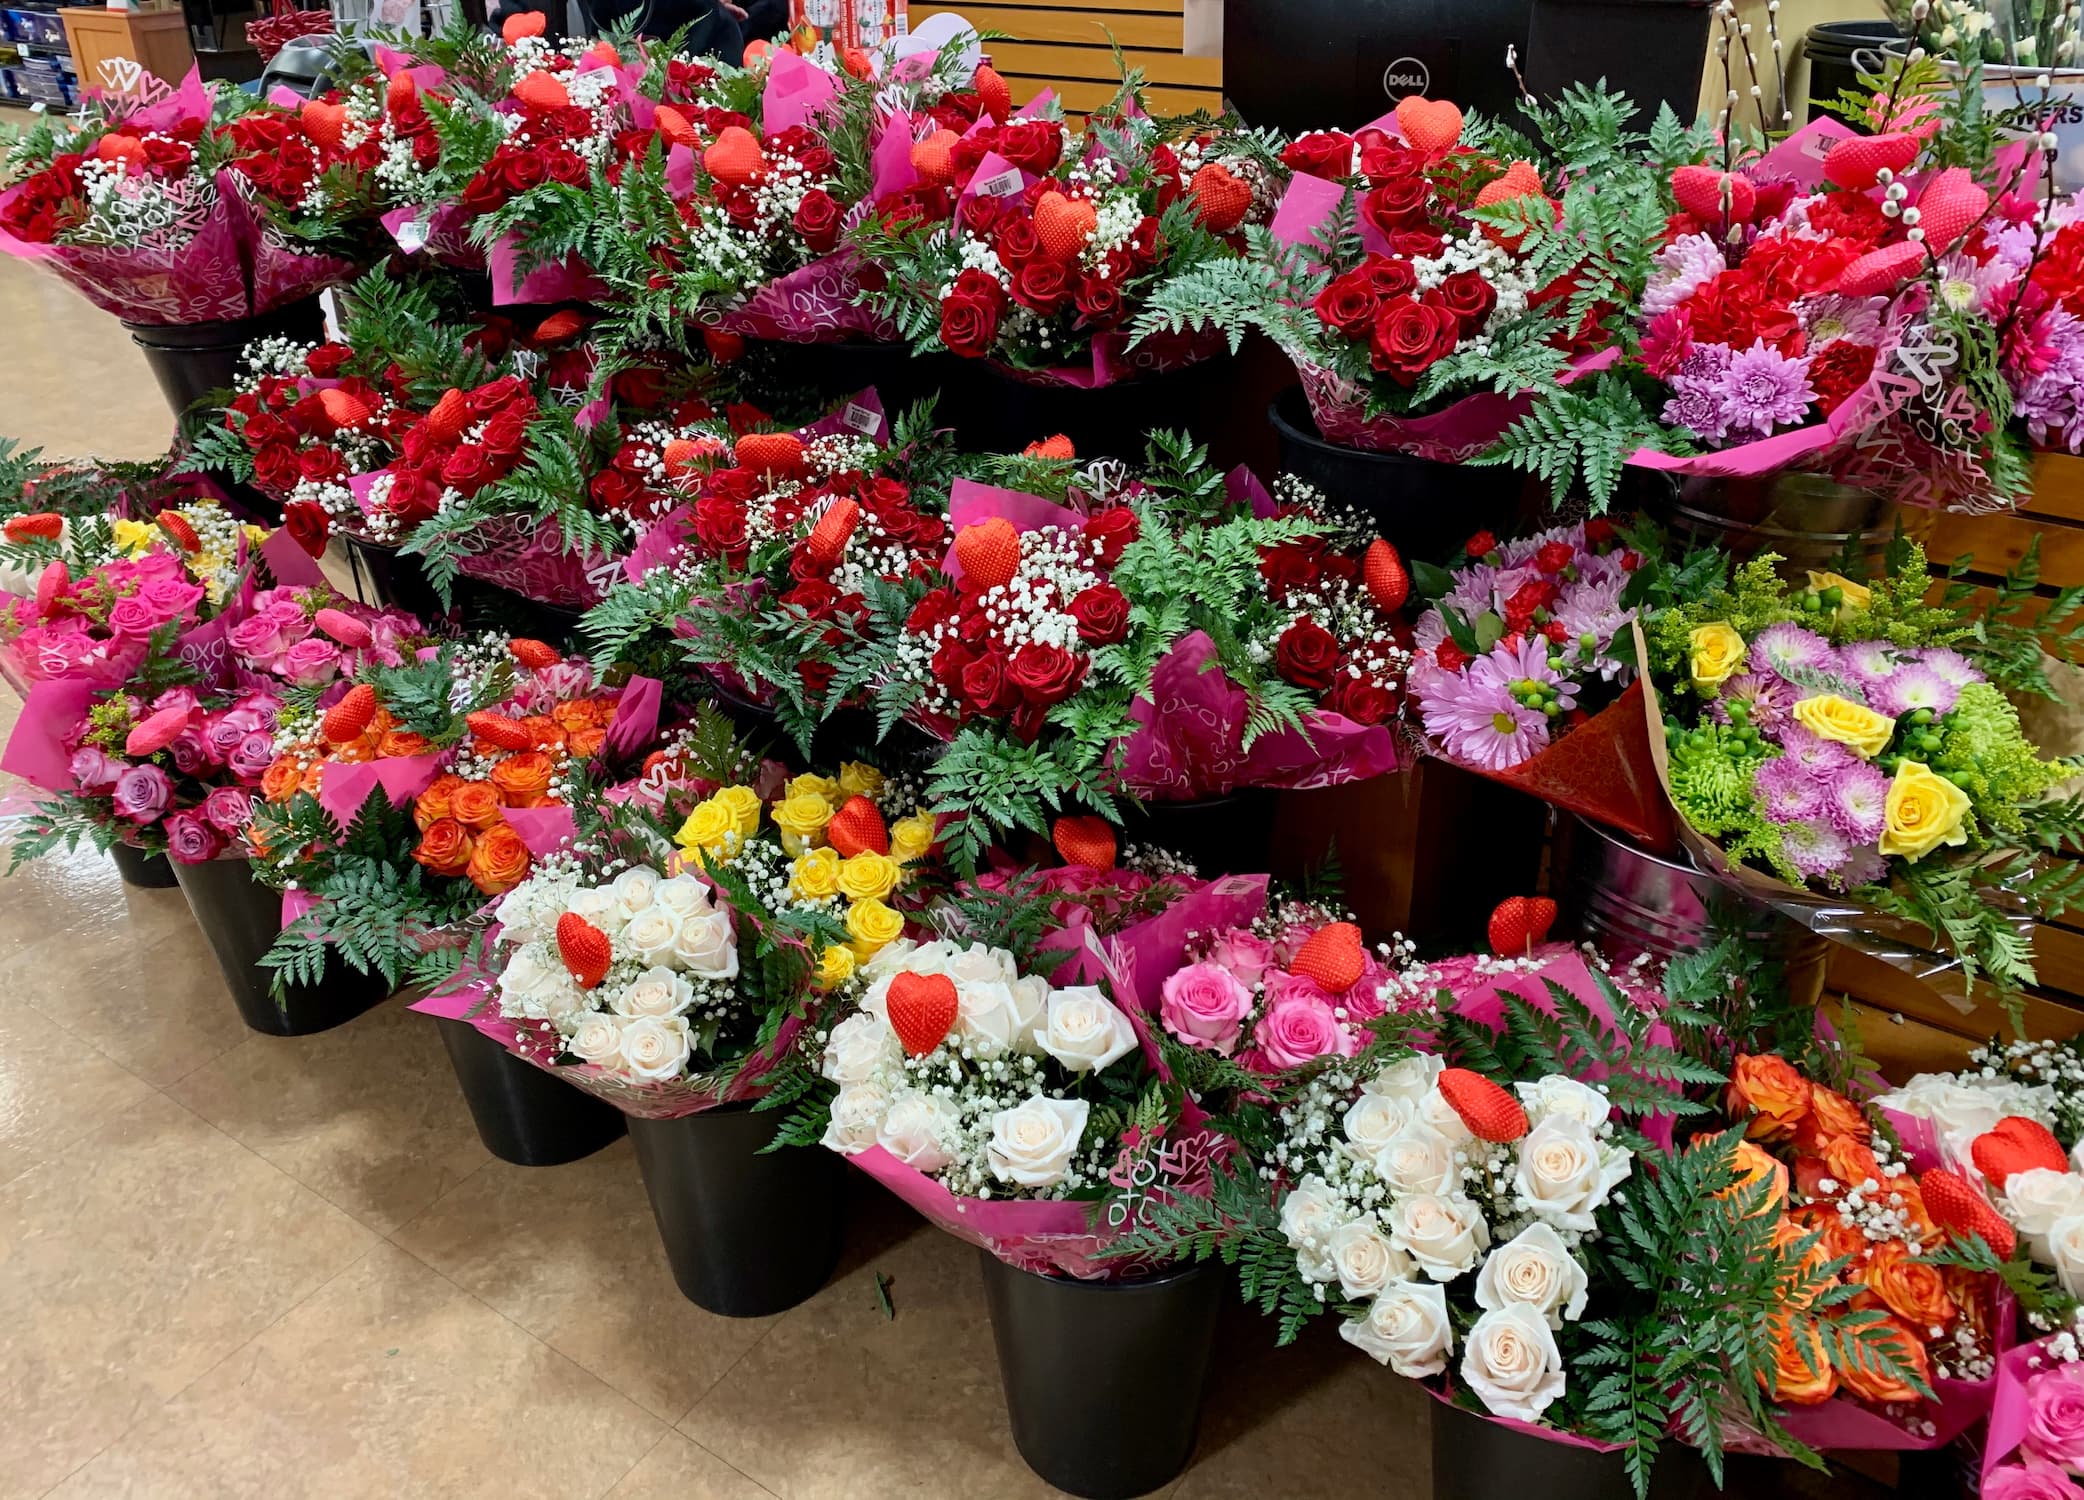 Display with various types and colors of flowers